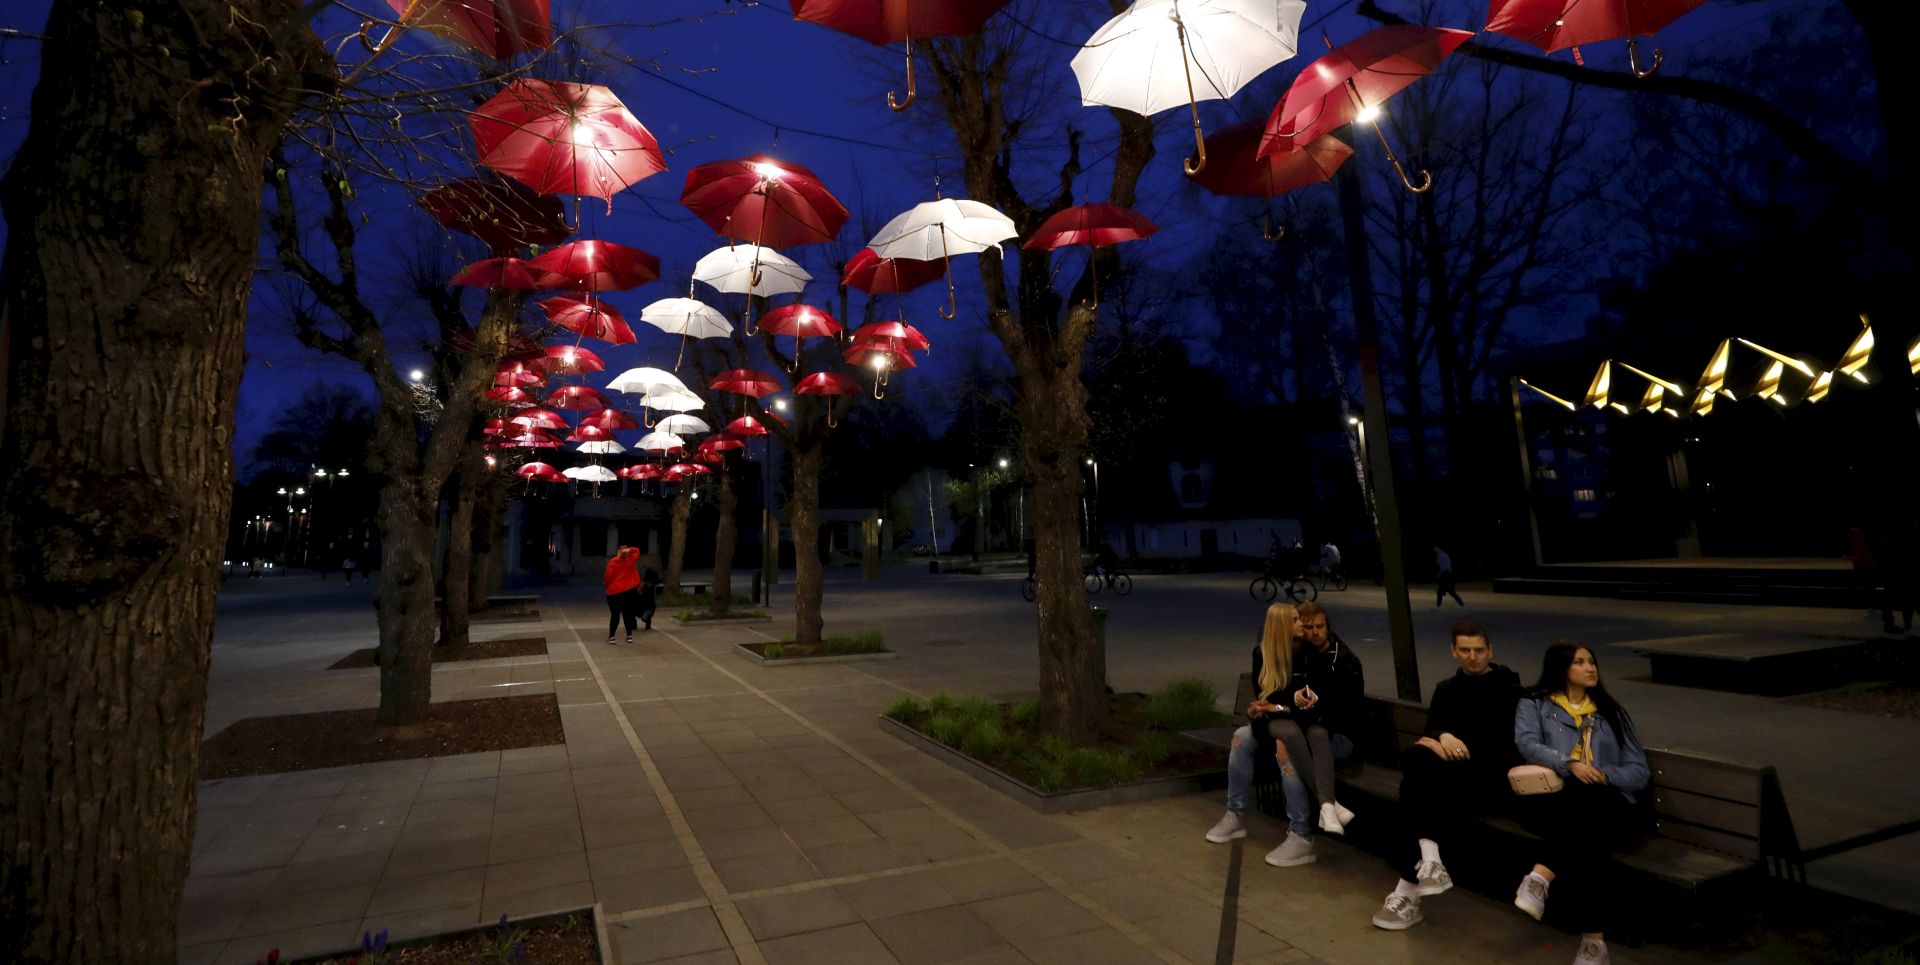 epa08403754 People sit under an umbrellas installation in the colors of the national flag, in Ogre, Latvia, 05 May 2020, during the coronavirus pandemic.  EPA/TOMS KALNINS